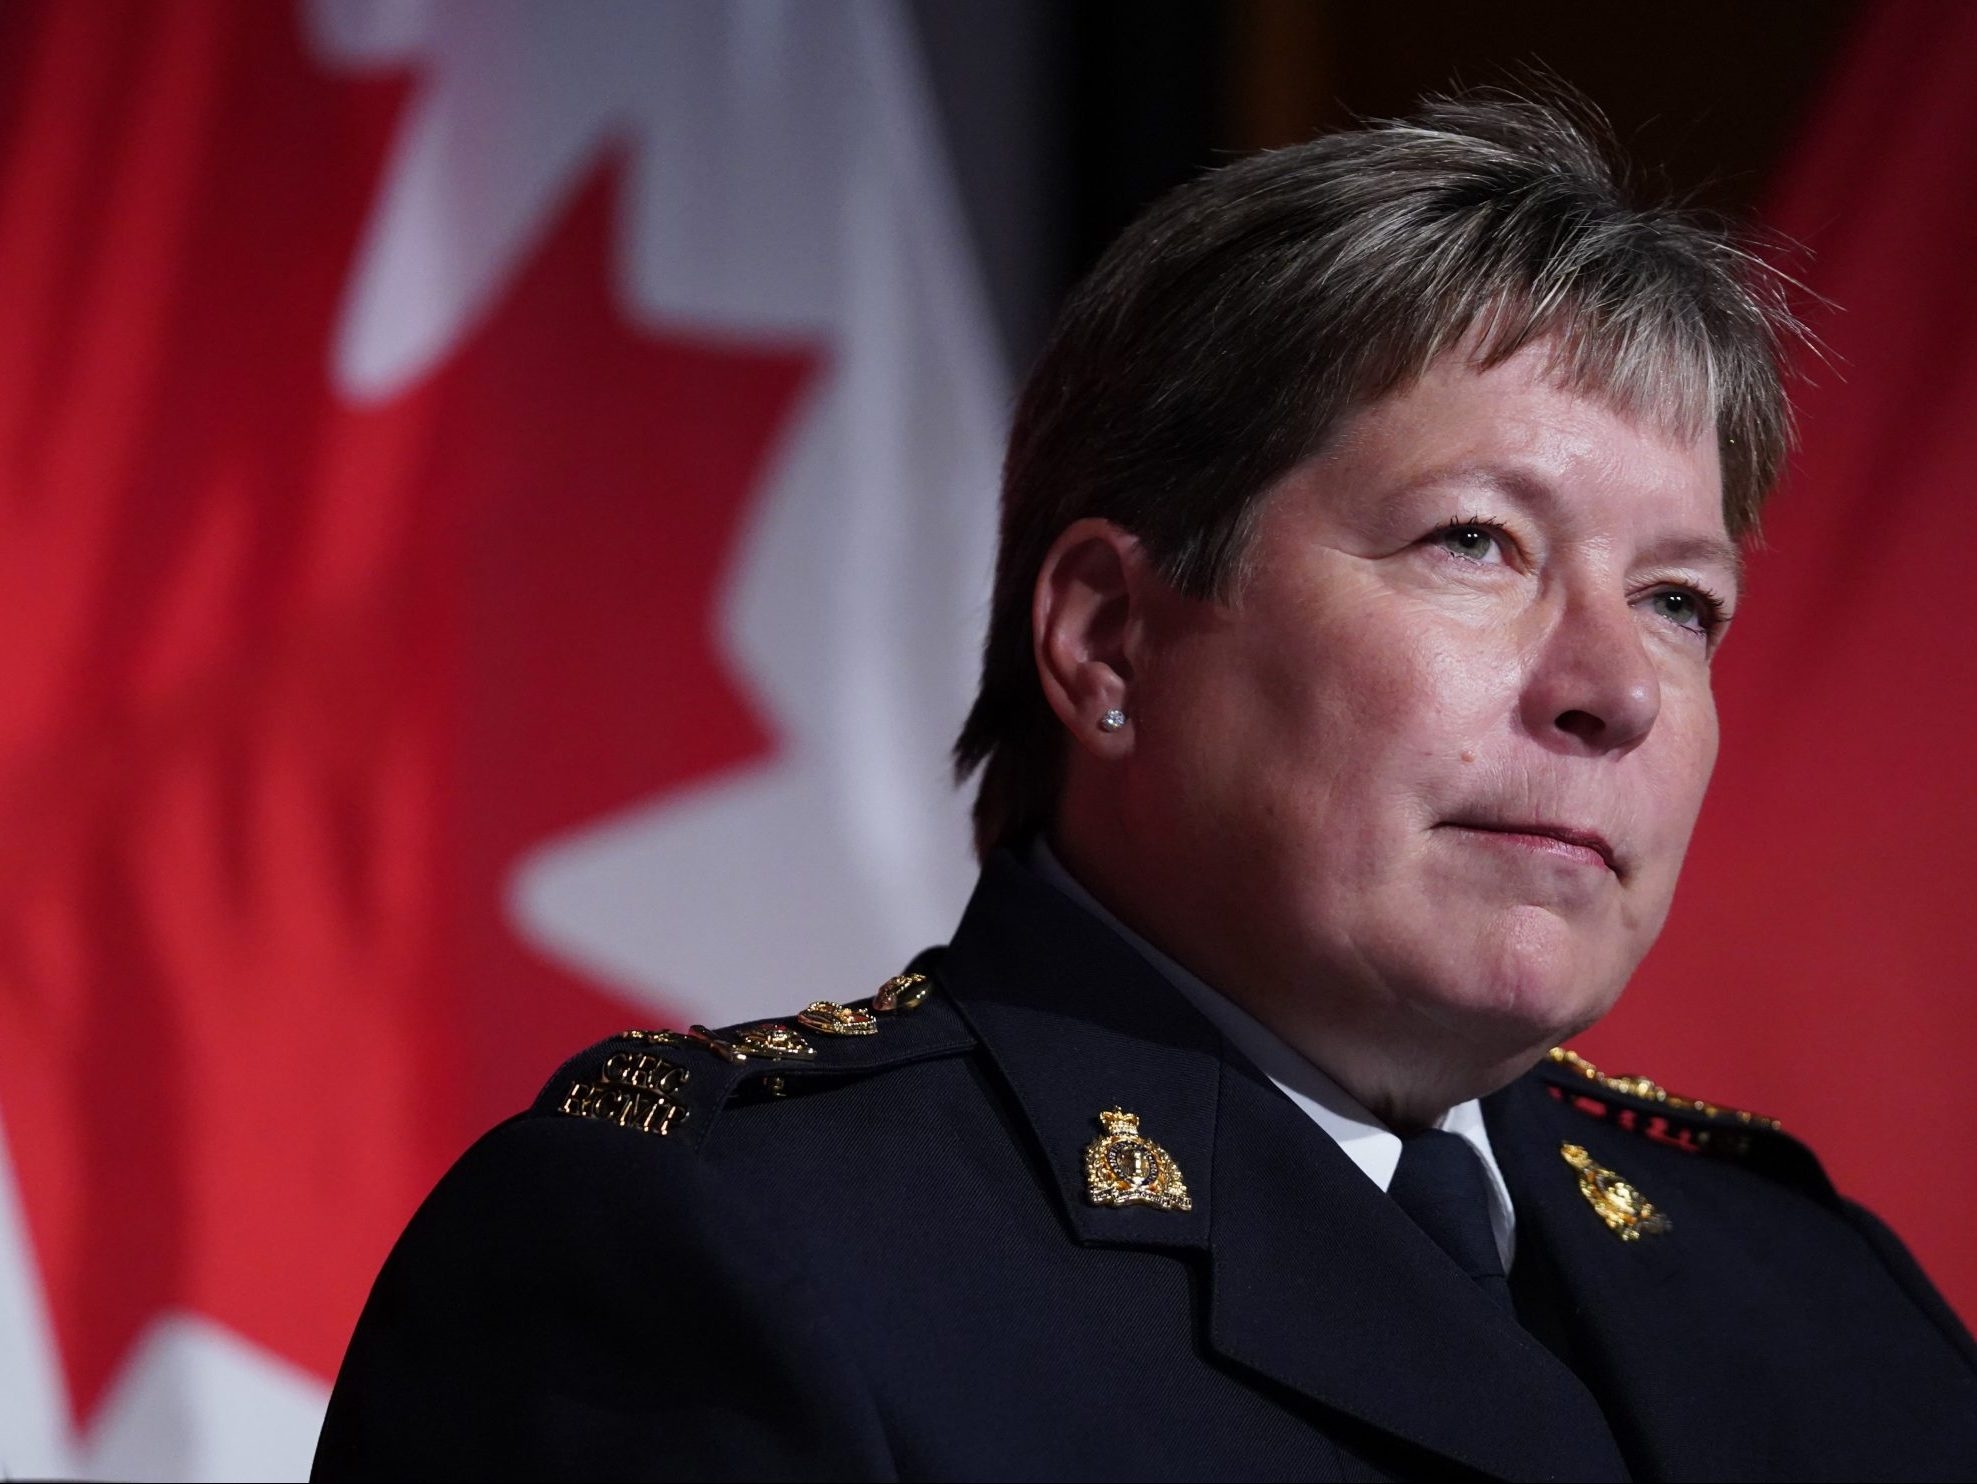 LILLEY: Do you believe RCMP members or weasel words from politicians?